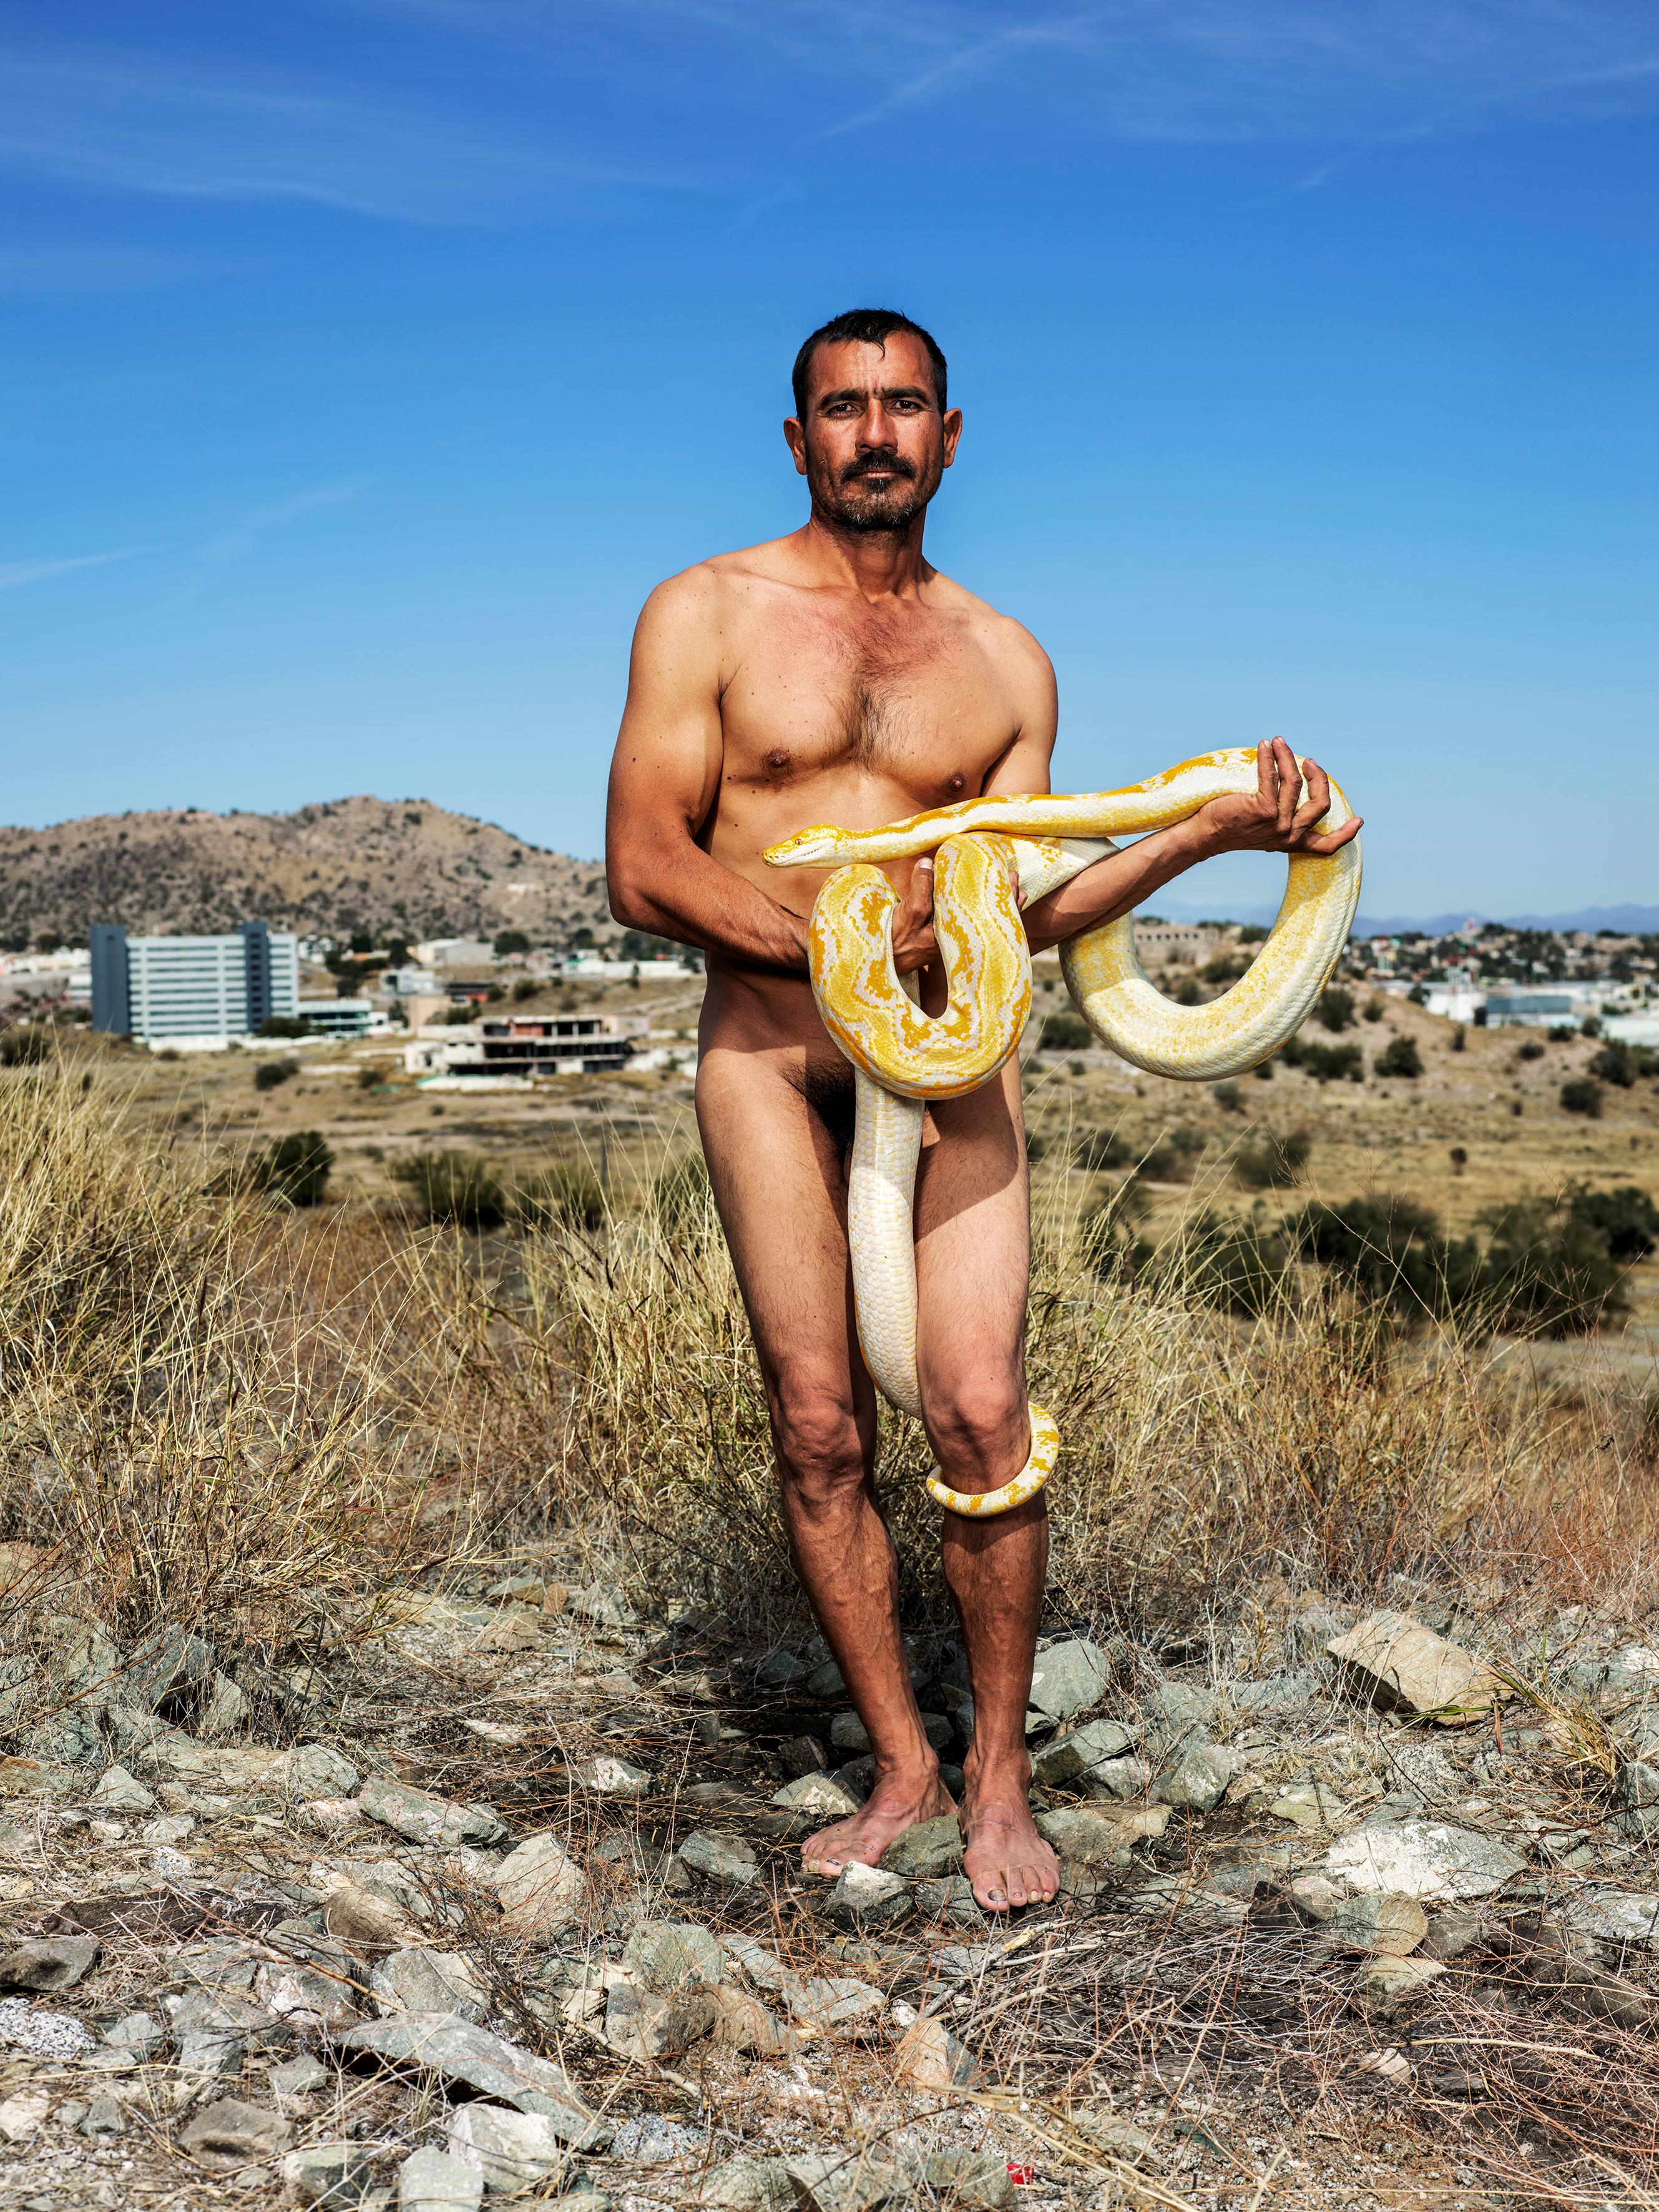 The Snake Charmer, Hermosillo, 2019 - Pieter Hugo (Colour Photography)
Signed on reverse
Archival pigment print

Available in two sizes:
47 x 35 1/2 inches, edition of 7 + 2 APs
63 x 47 inches, edition of 7 + 2 APs

Pieter Hugo (born 1976) is a